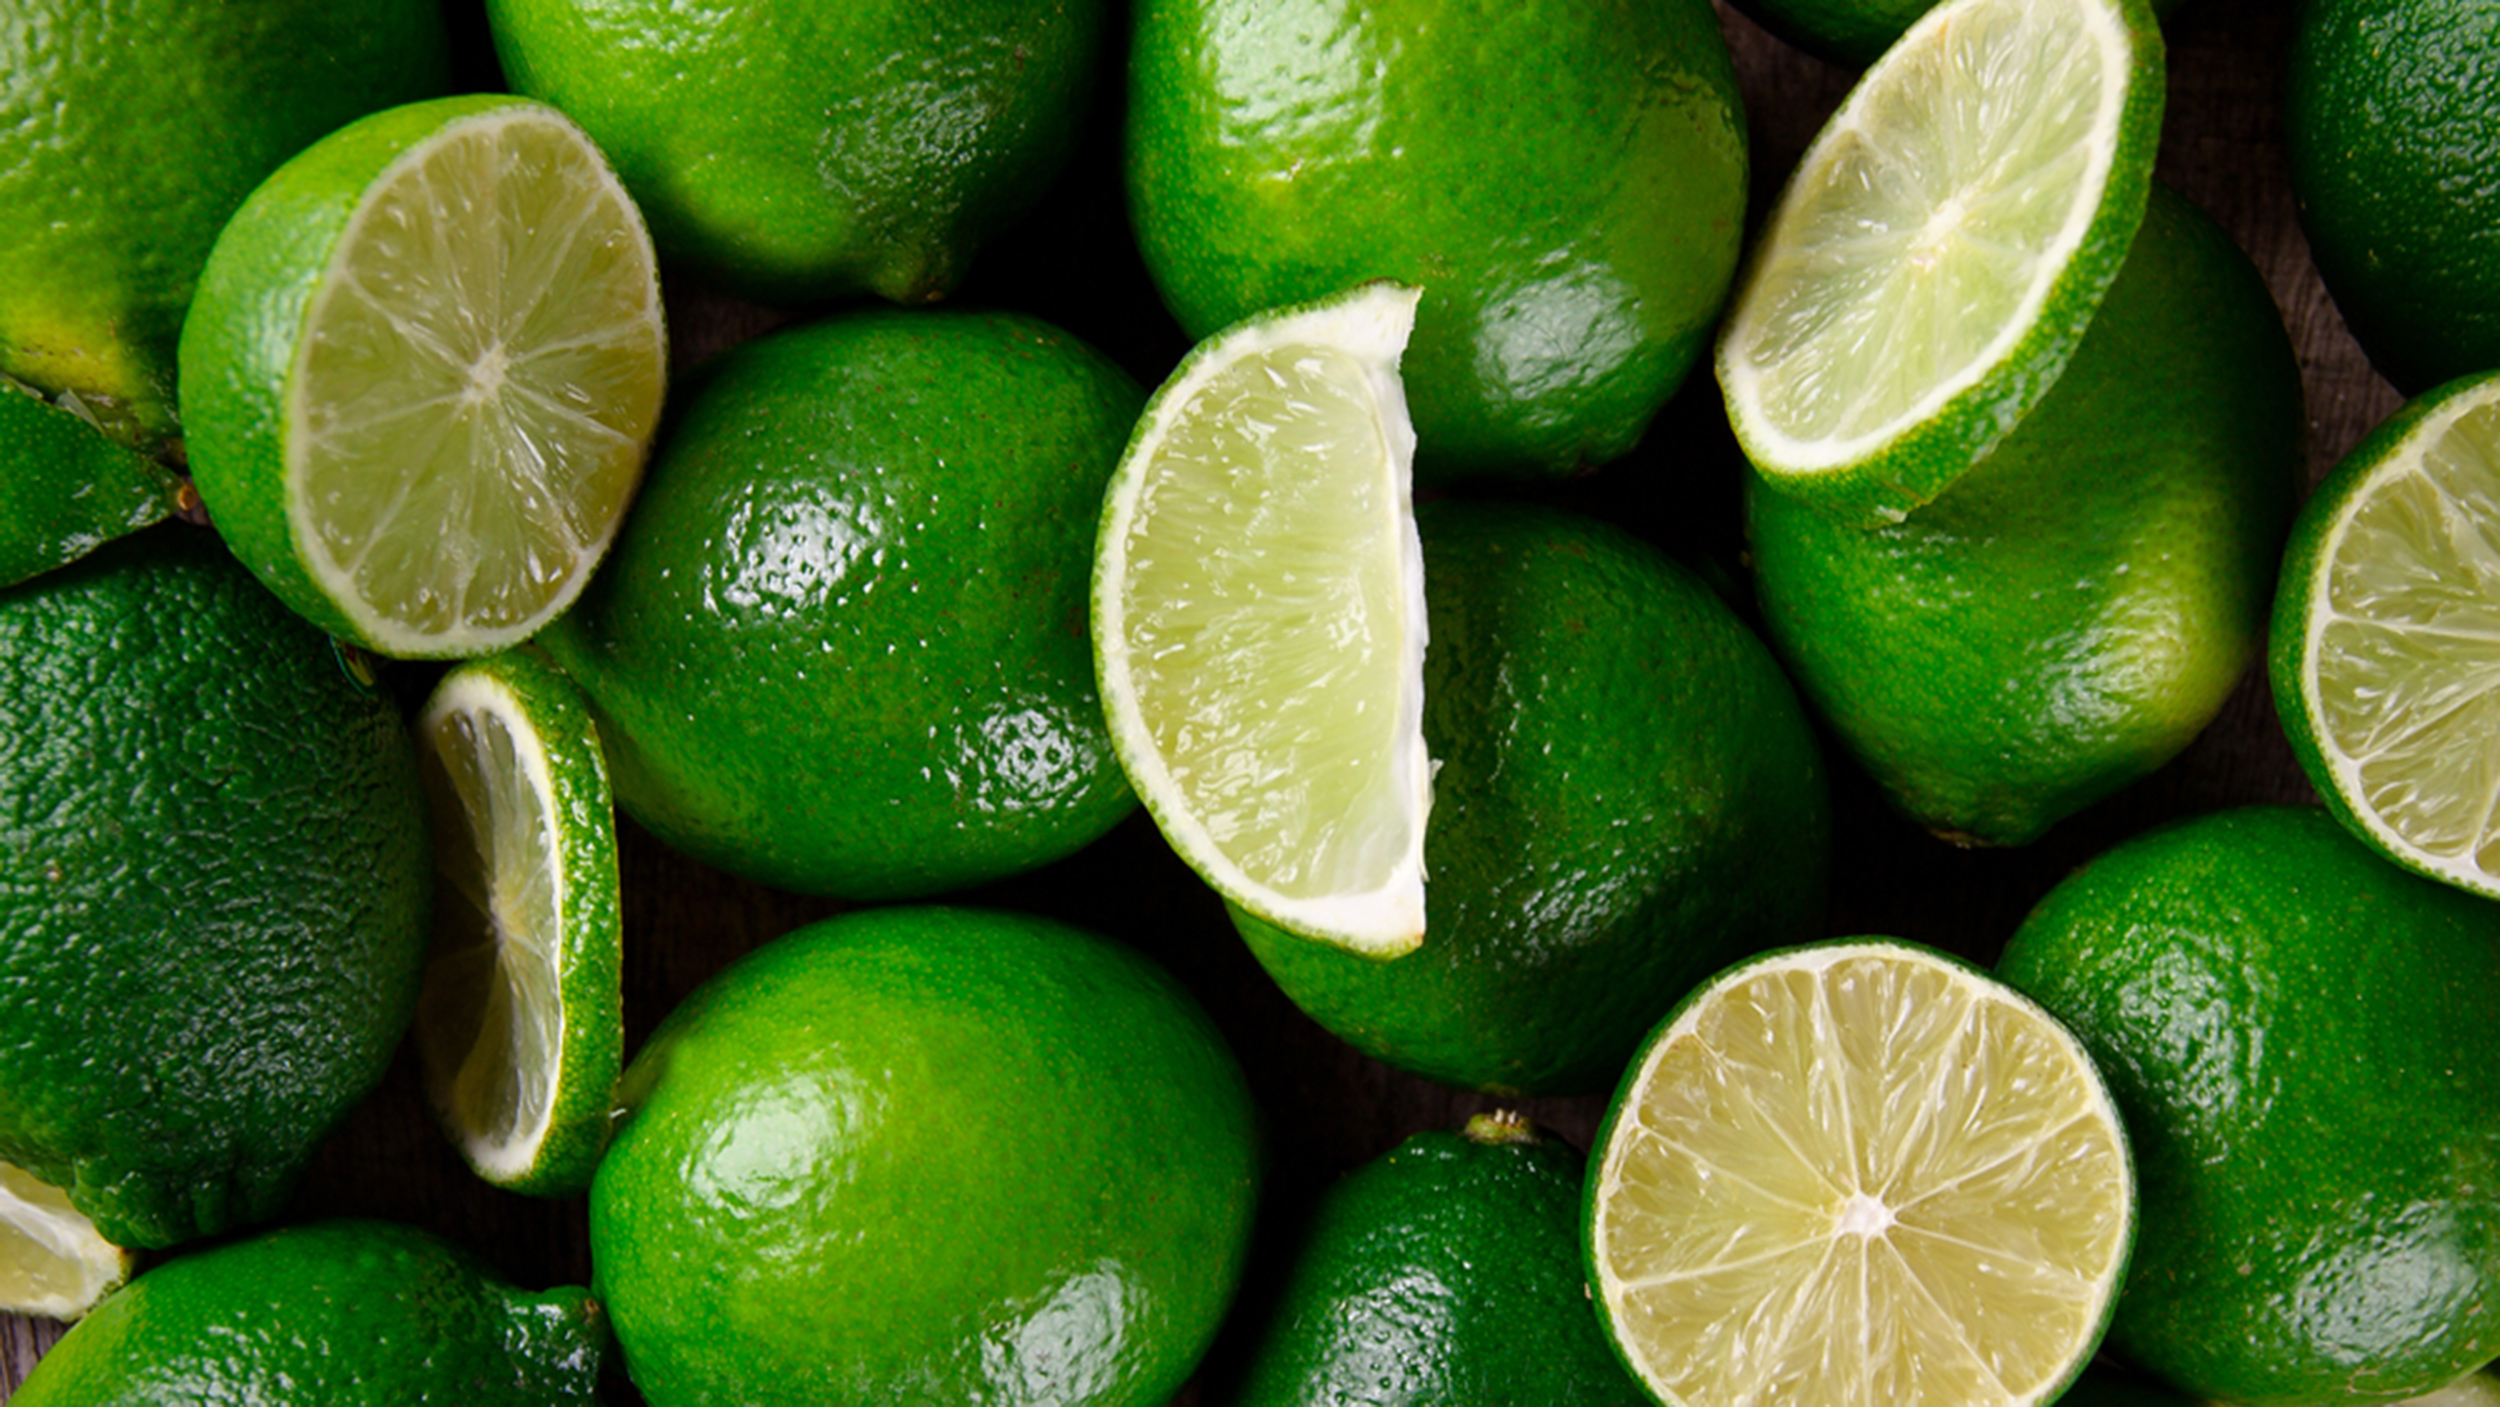 DIY: 7 surprising household uses for limes